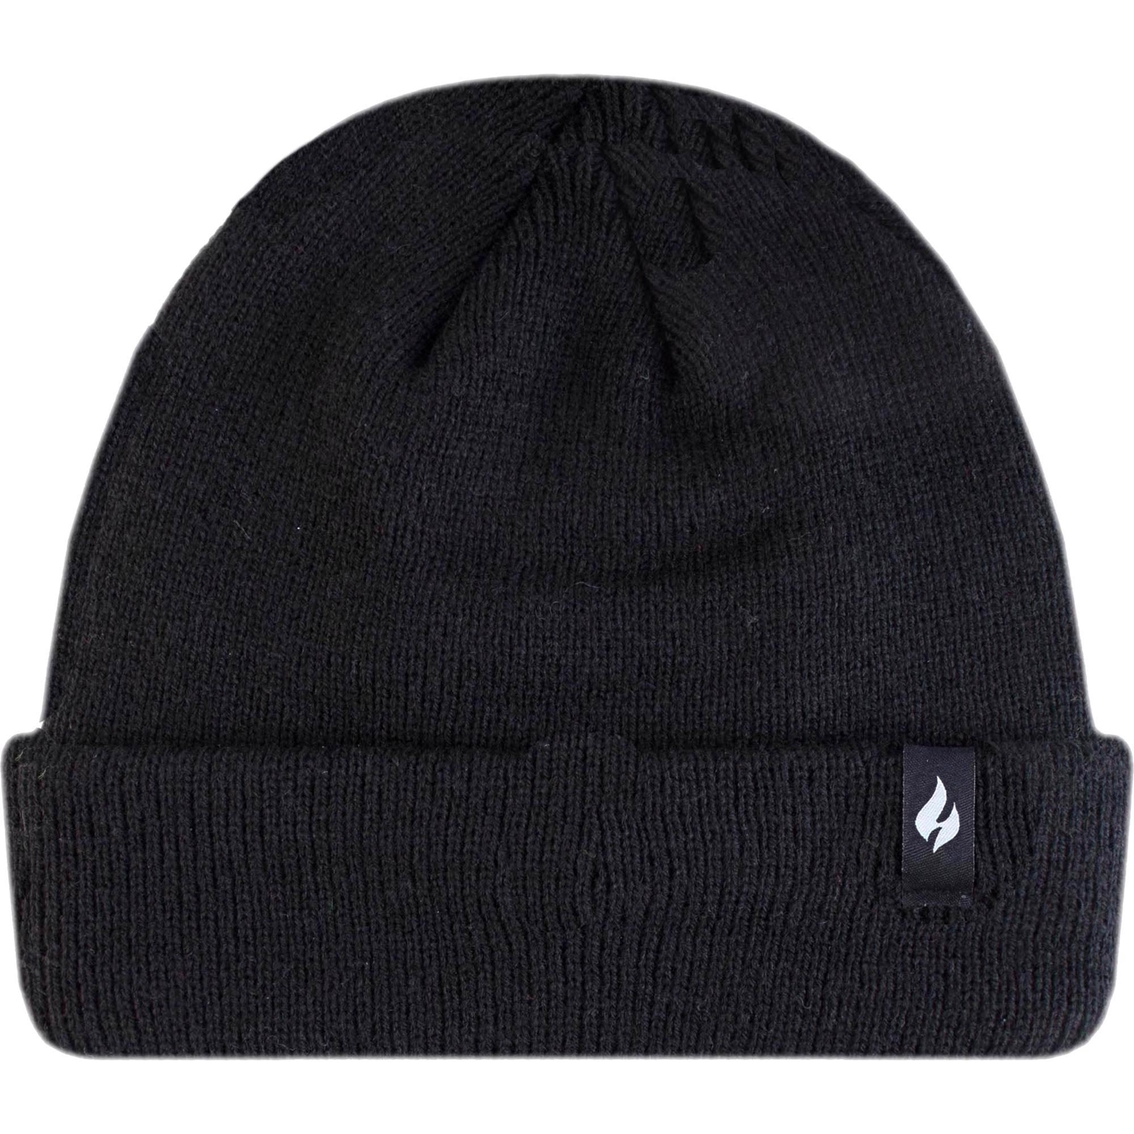 Heat Holders Roll Up Knit Cap - Image 1 of 2